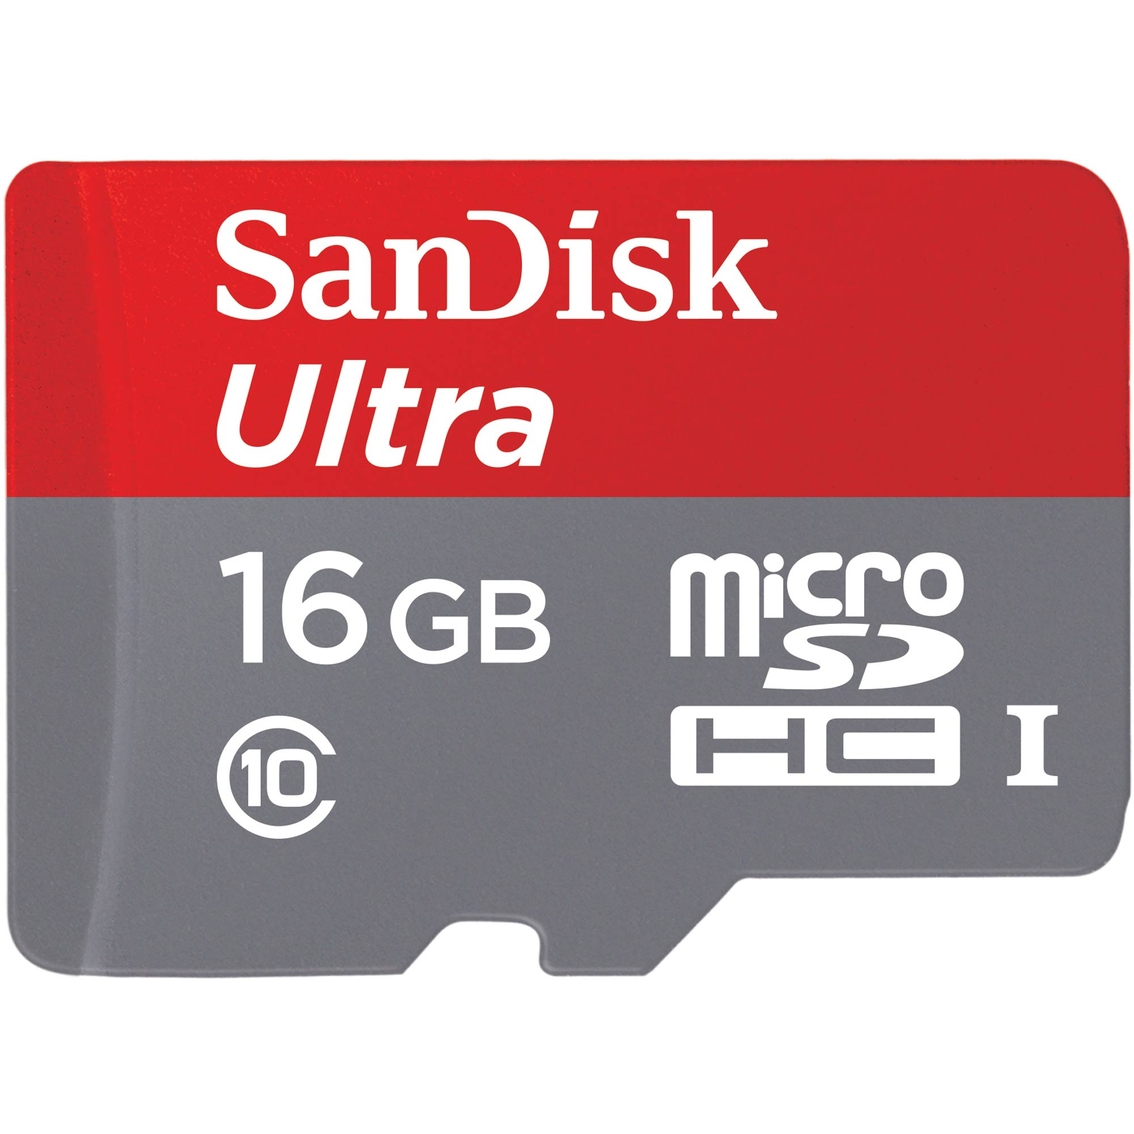 SanDisk 16GB Ultra microSDHC, microSDXC UHS-I Card with Adapter